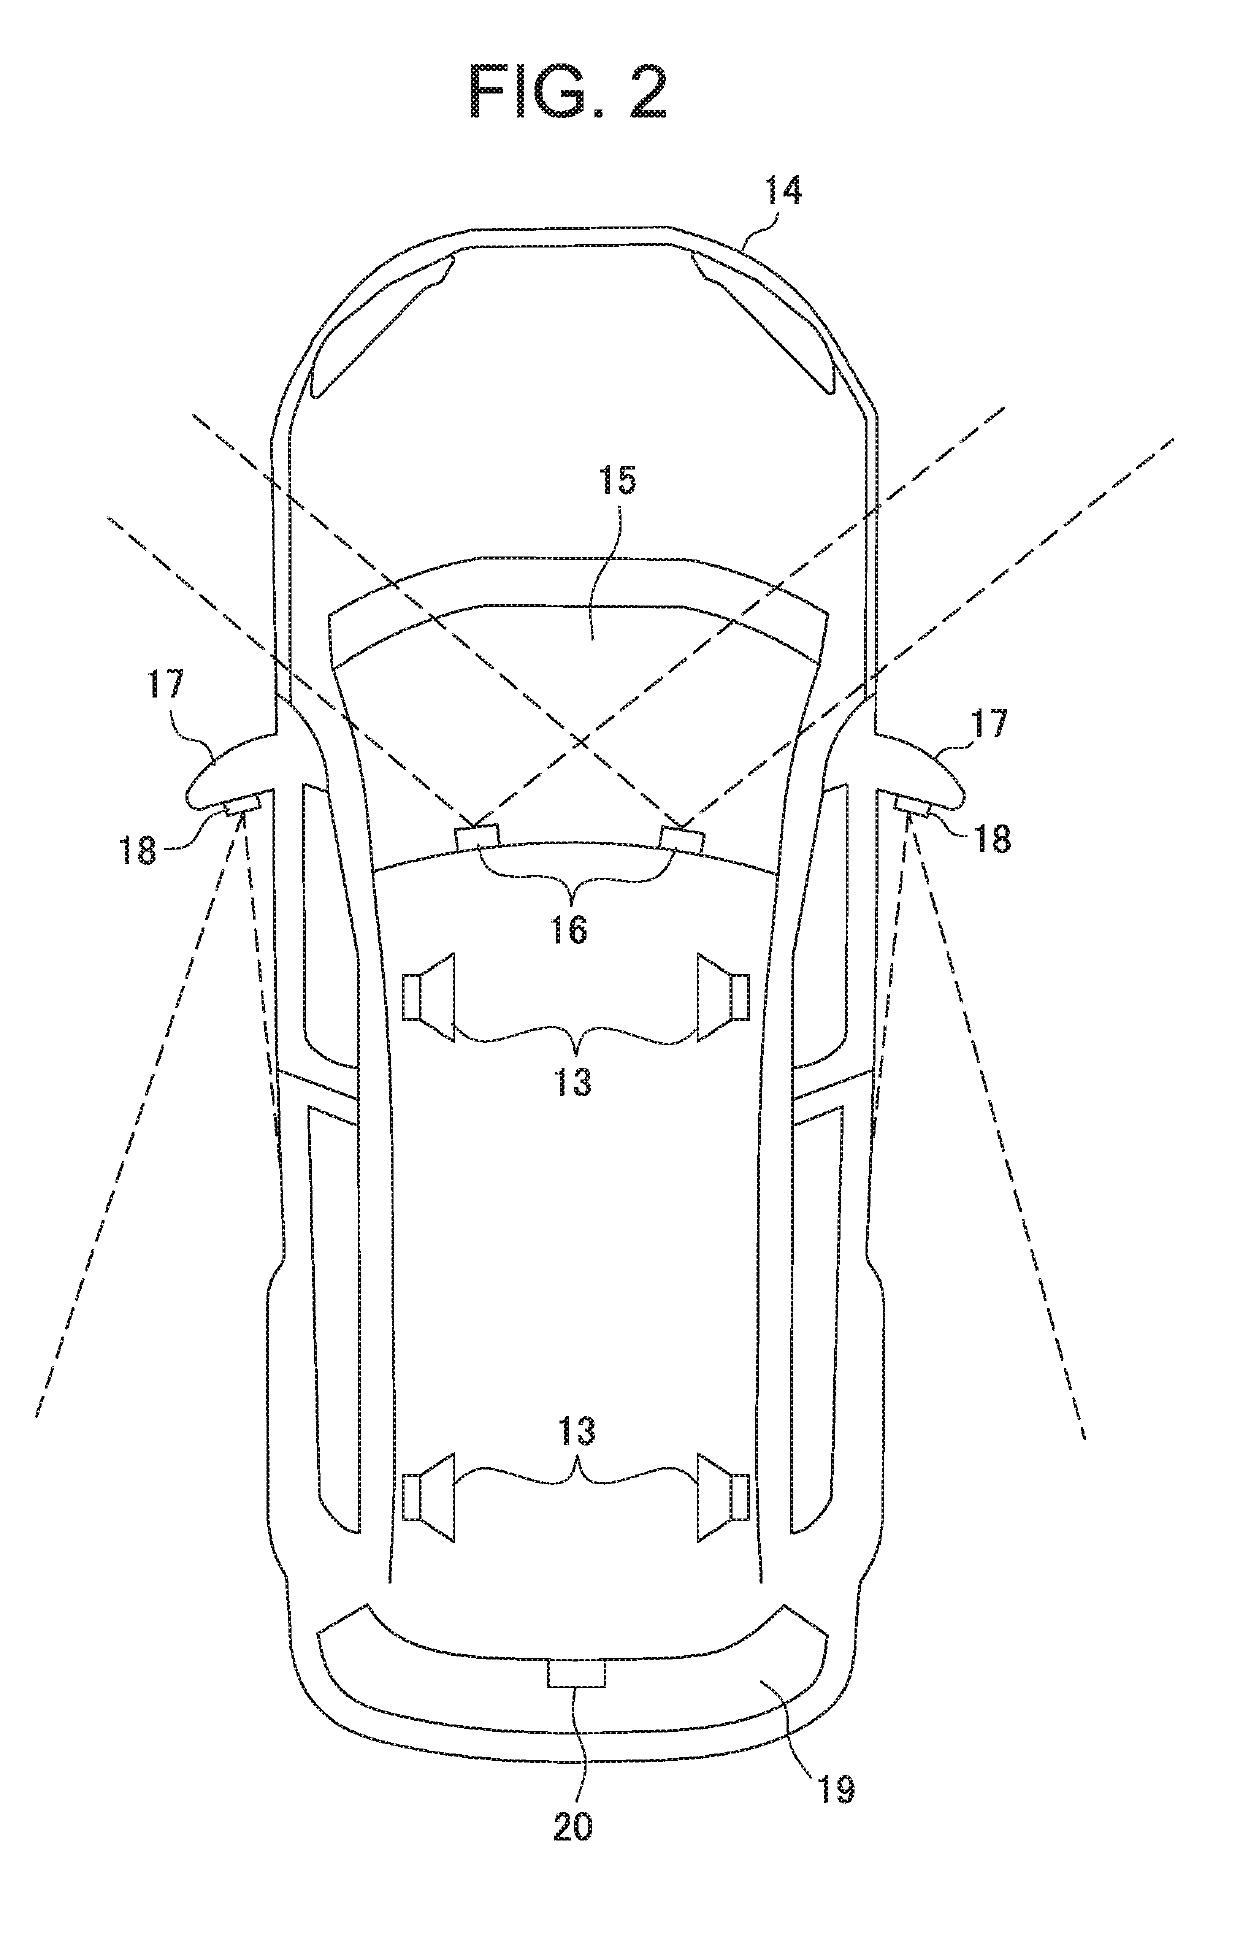 Automatic driving system for vehicles